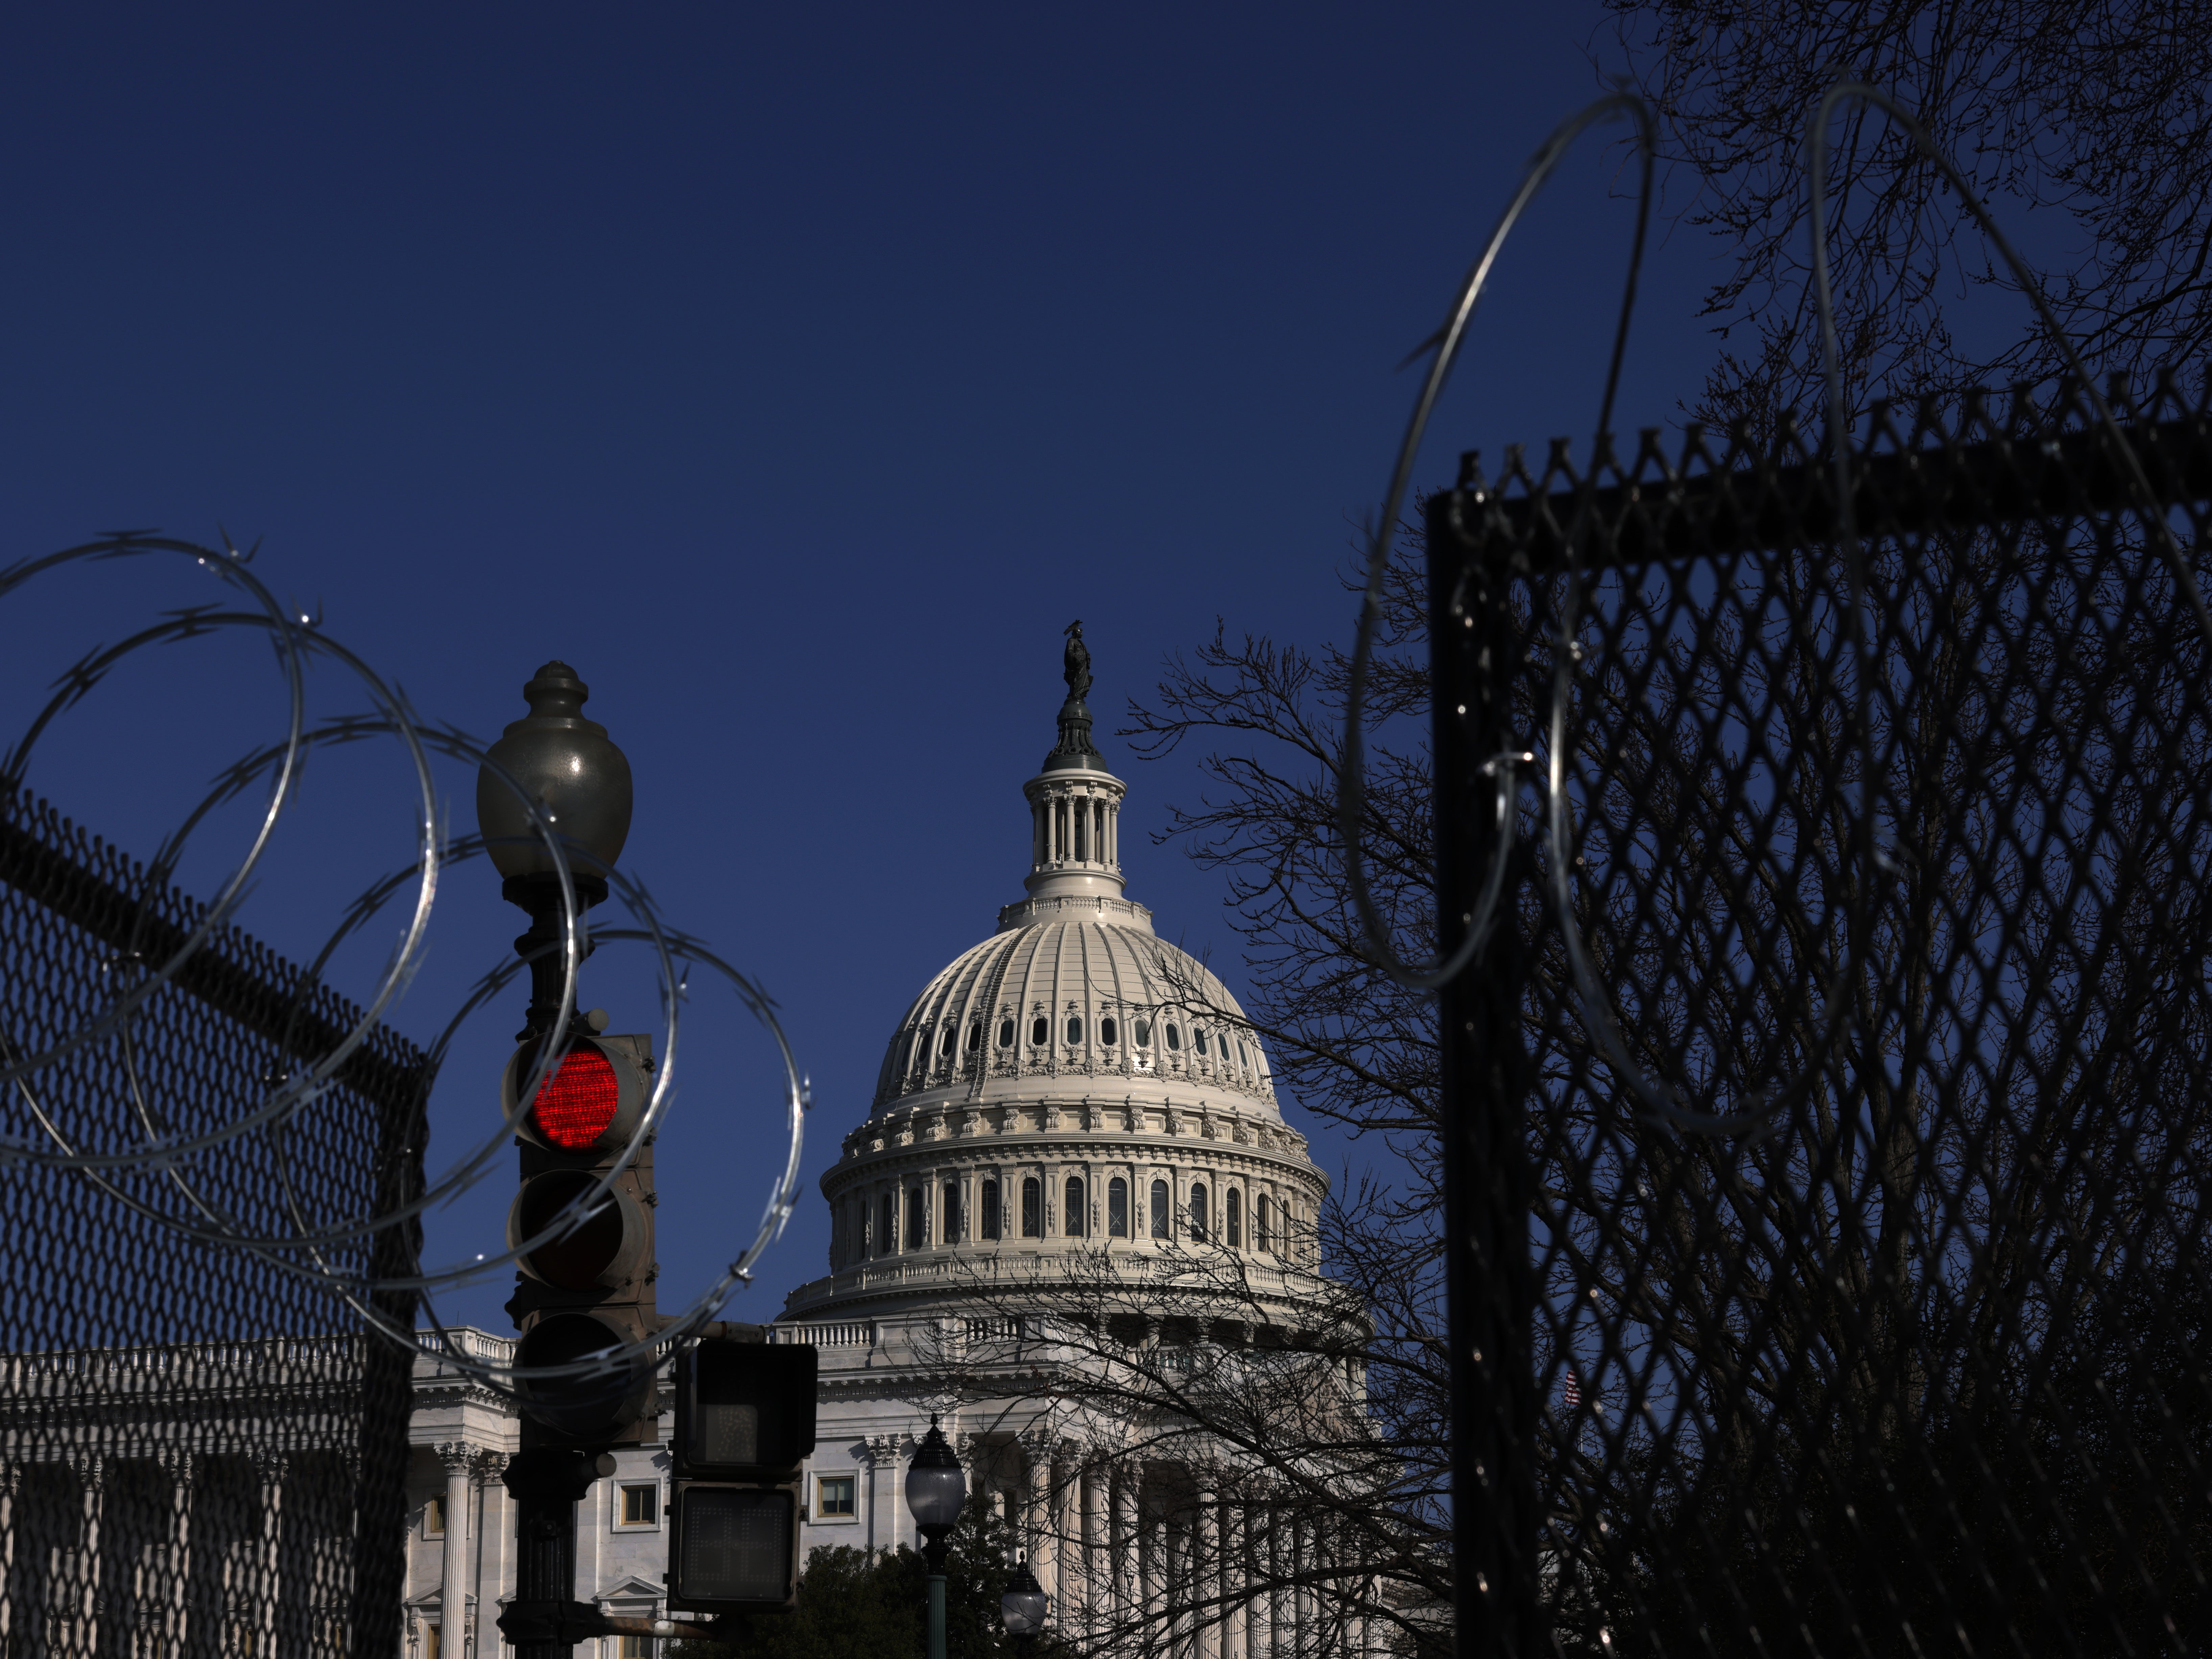 Razor wire is attached to the top of temporary fencing as the U.S. Capitol is seen in the background on March 4, 2021 on Capitol Hill.